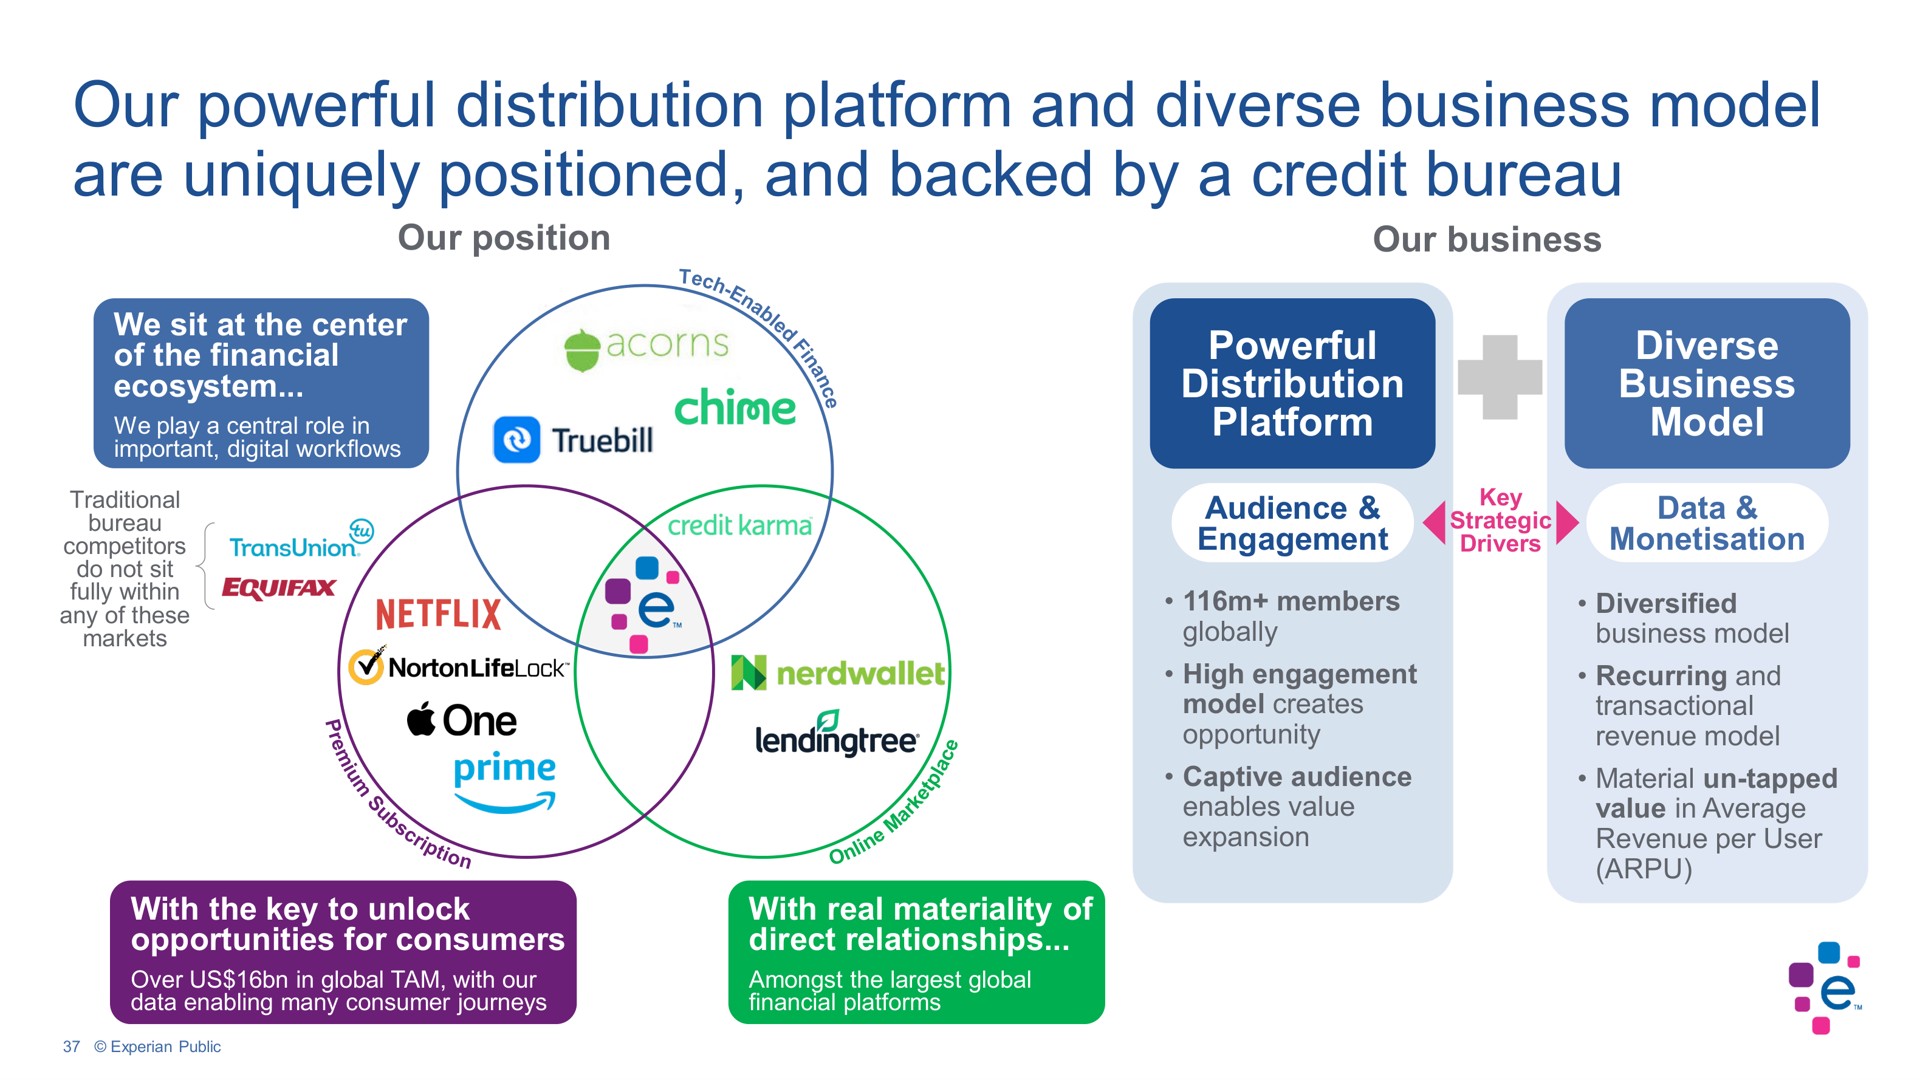 our powerful distribution platform and diverse business model are uniquely positioned and backed by a credit bureau | Experian